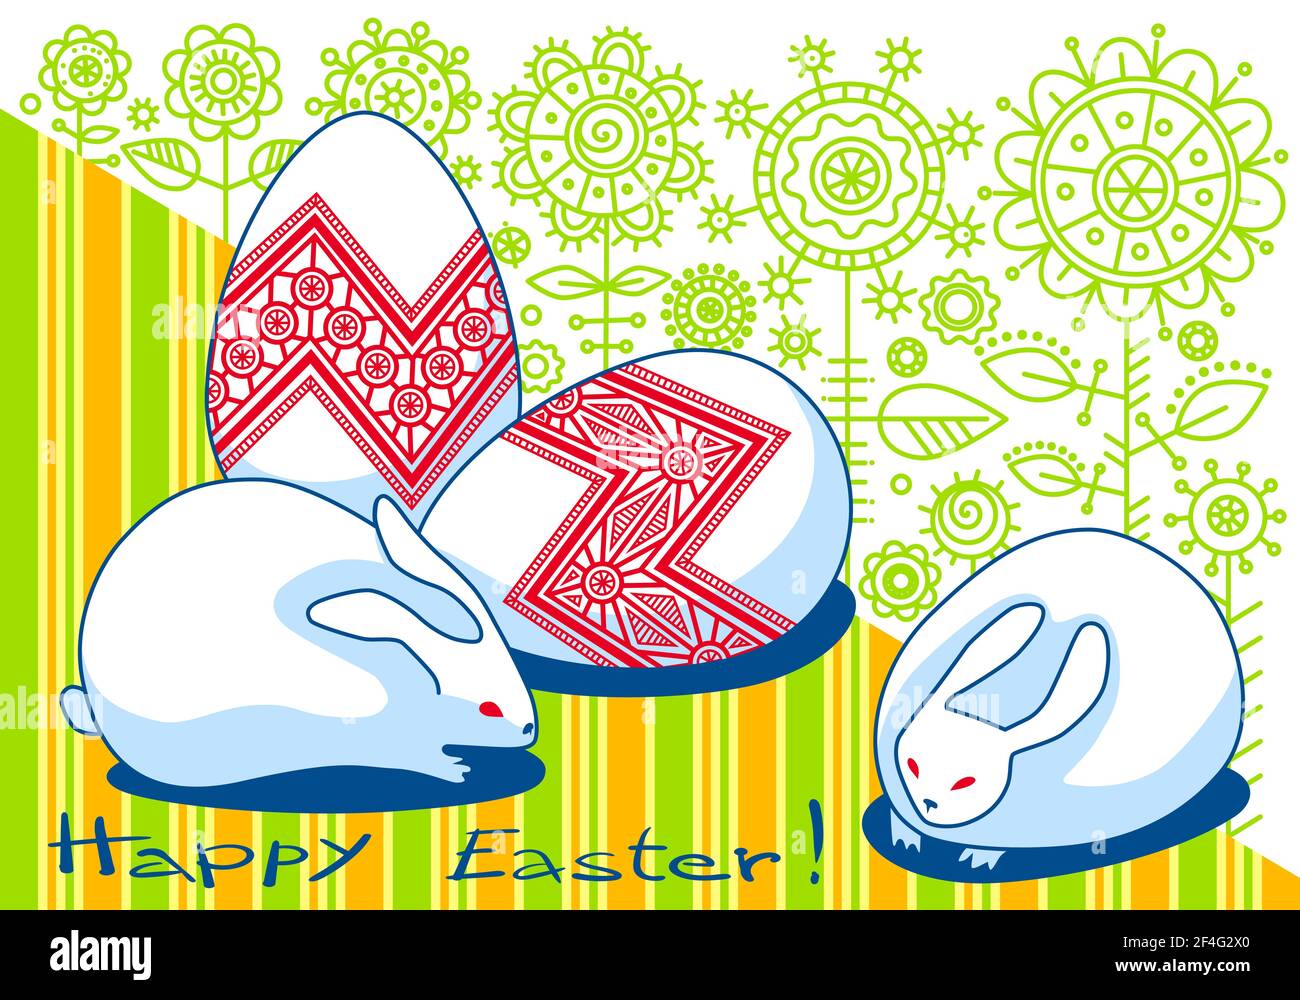 Happy easter. Creative composition of white rabbits and eggs against a background of yellow-green stripes and decorative flowers. Stock Vector